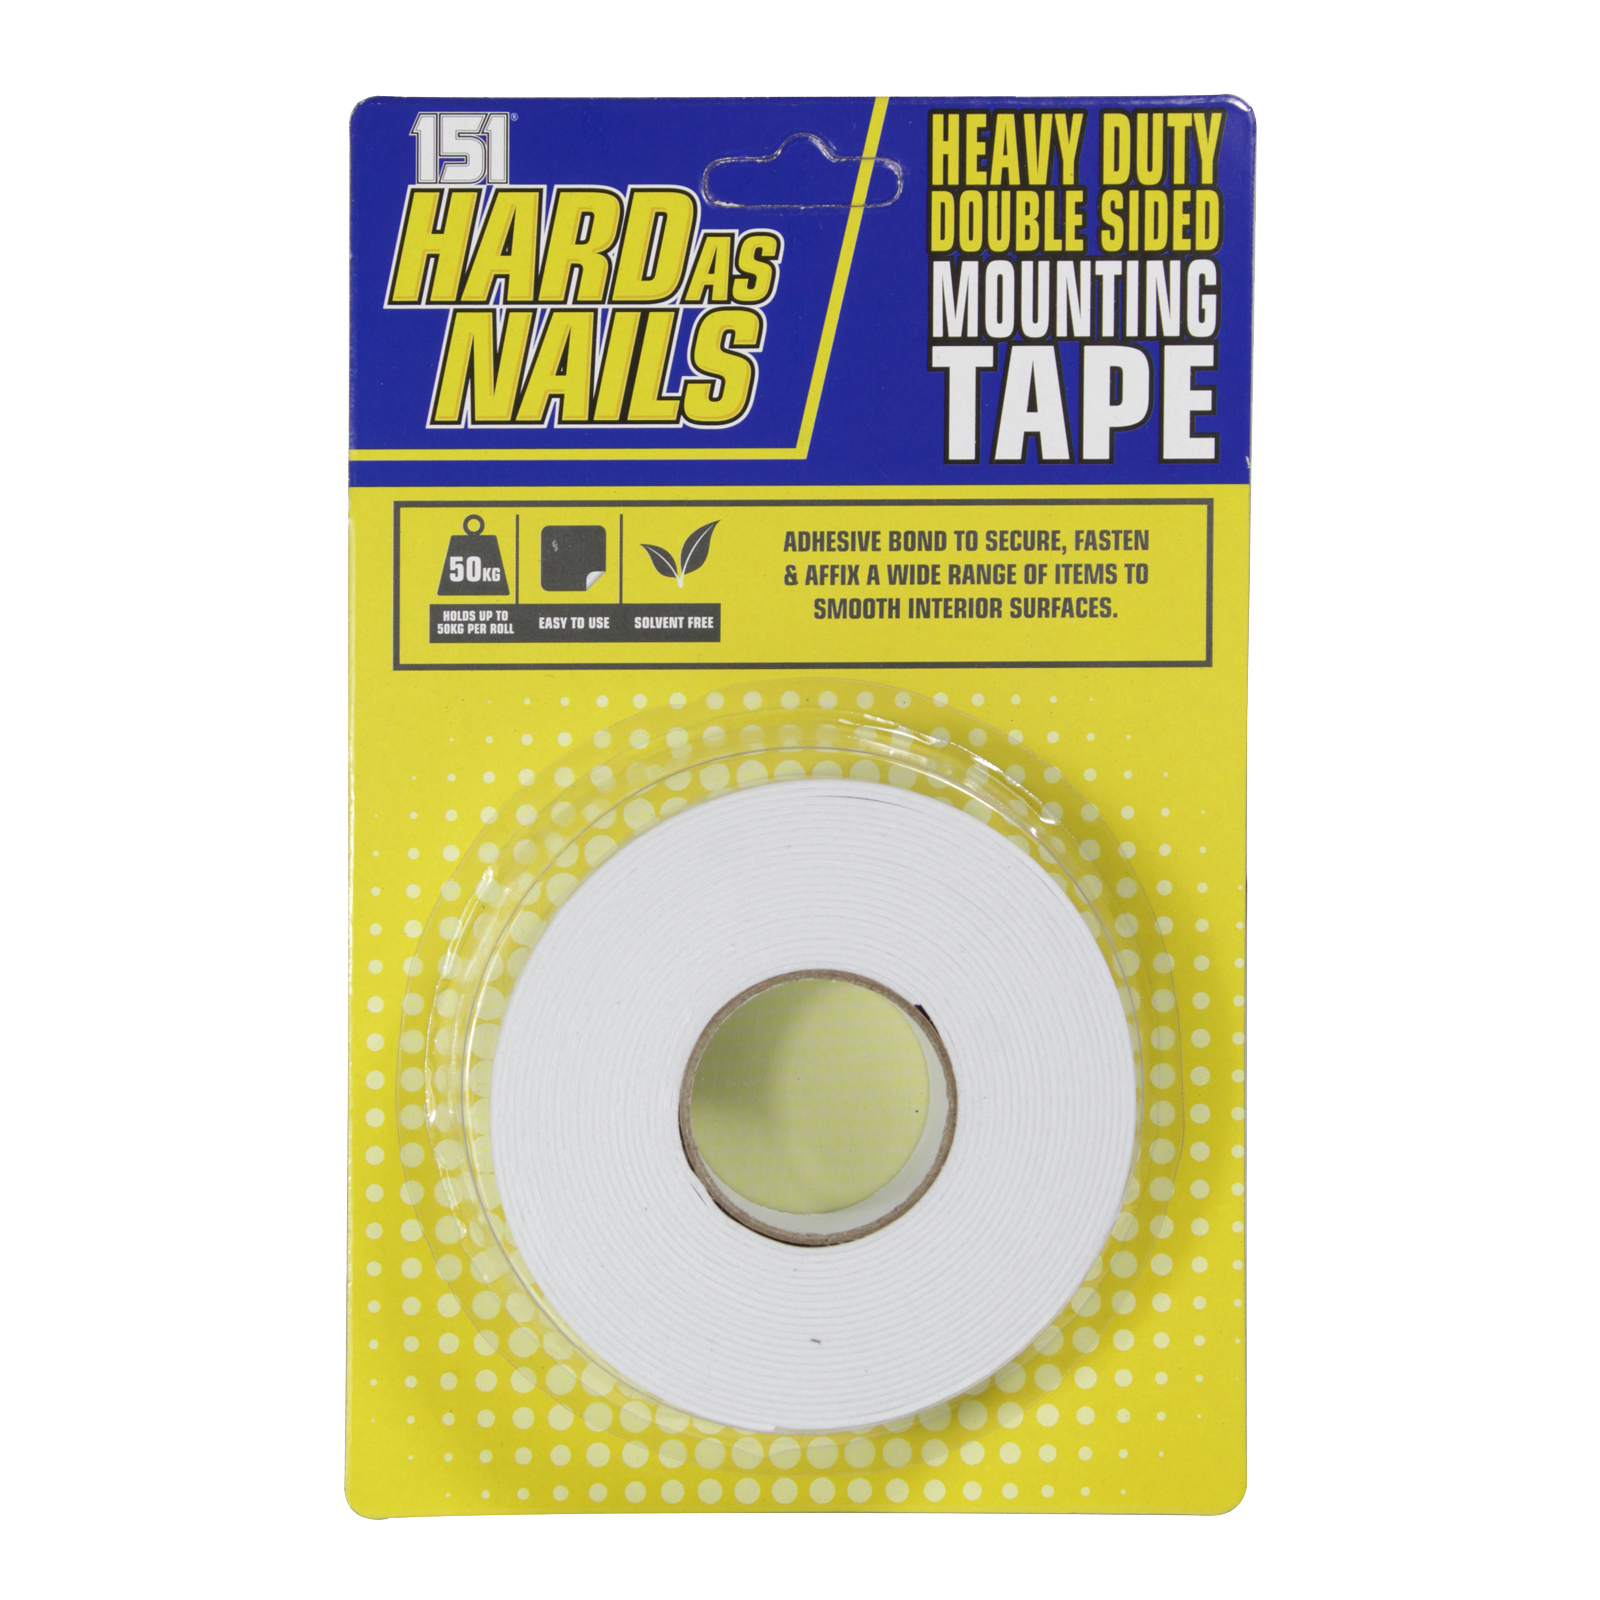 Double Sided Mounting Tape Heavy Duty Hard as Nails Tape Interior 5m Hold 50kg.